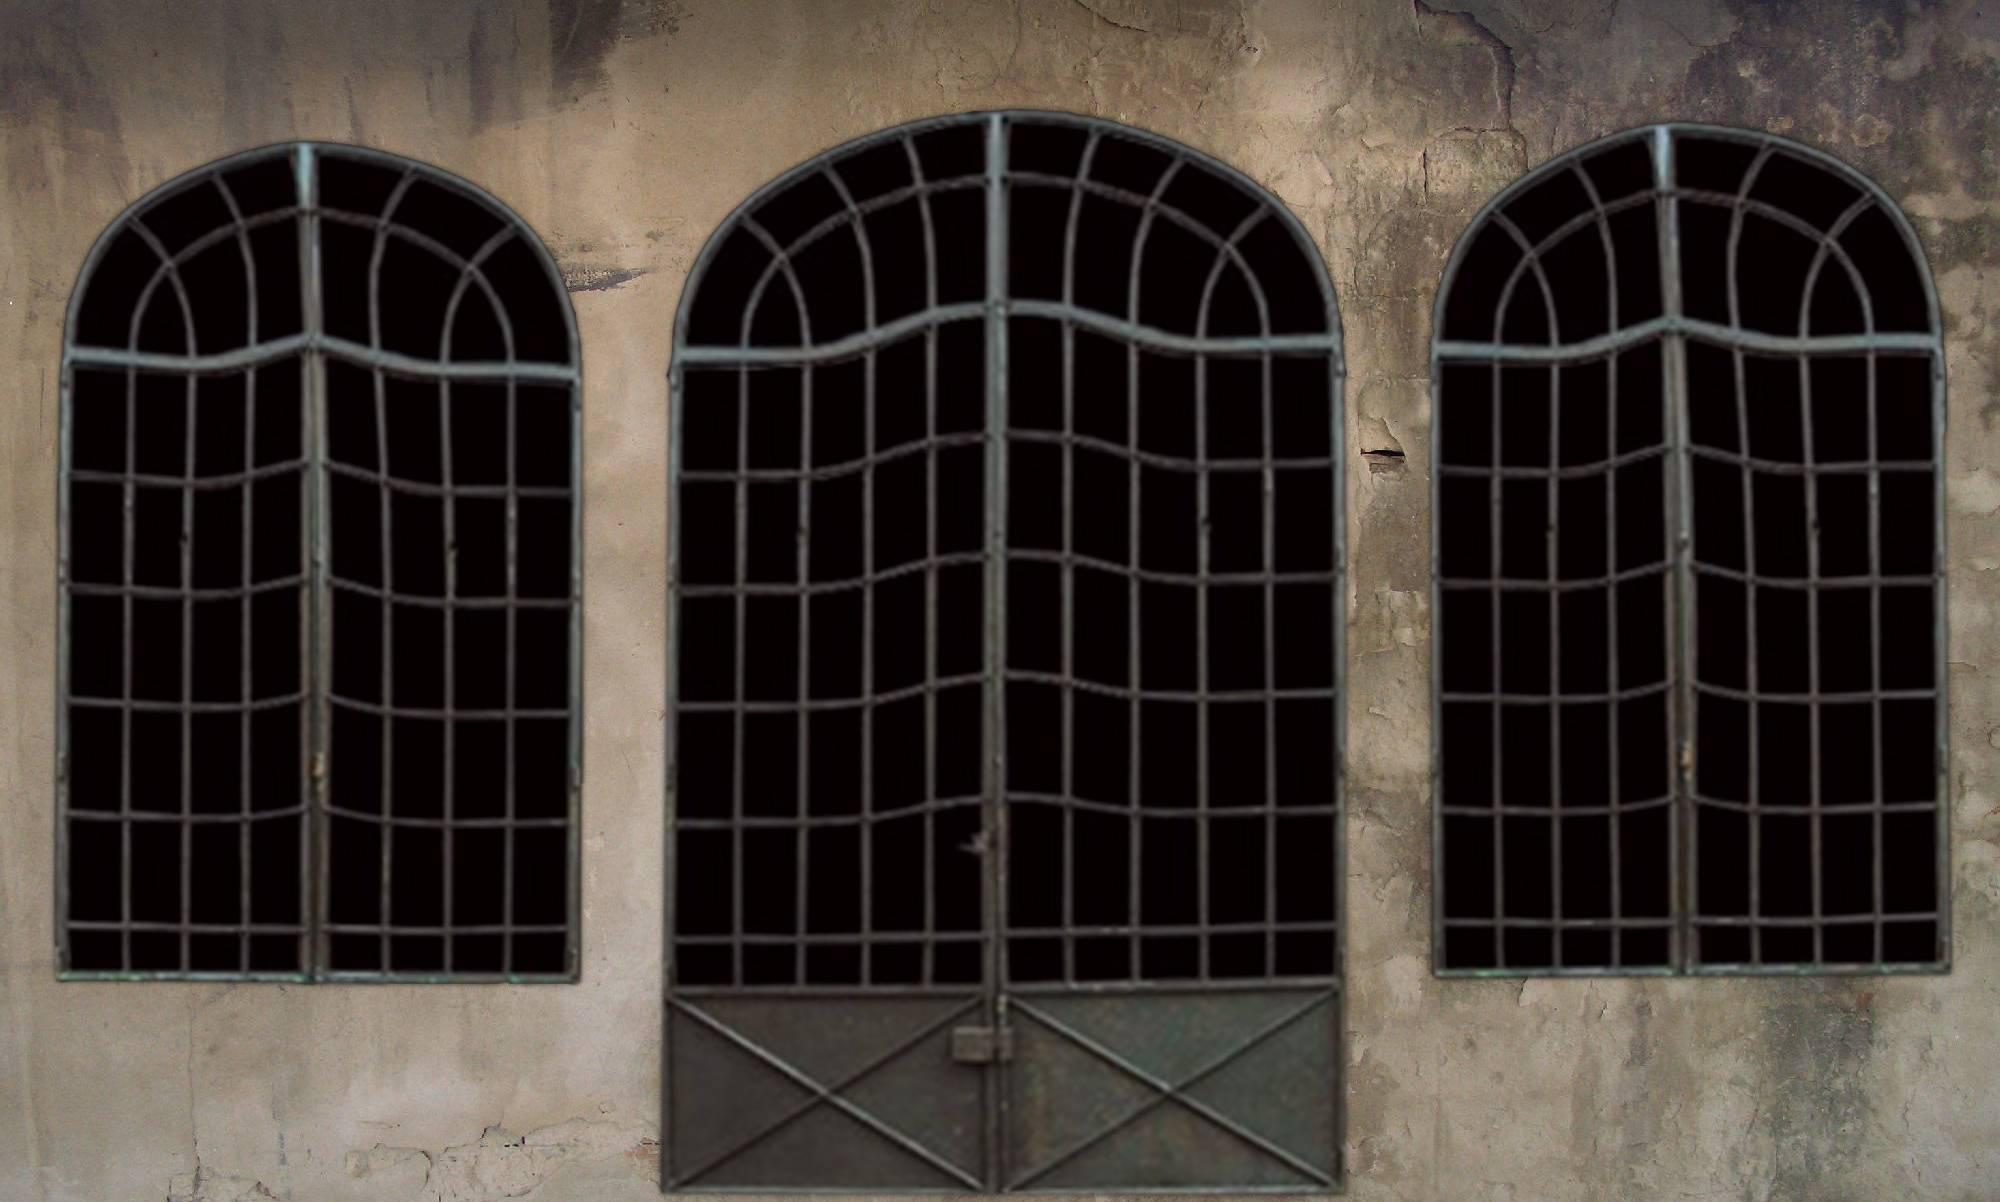 Set of late 19th century French handmade multi-light iron windows and doors. This unique set of windows and doors came from a 19th century stone house in the south of France. The windows were constructed approximately three feet off of the ground so